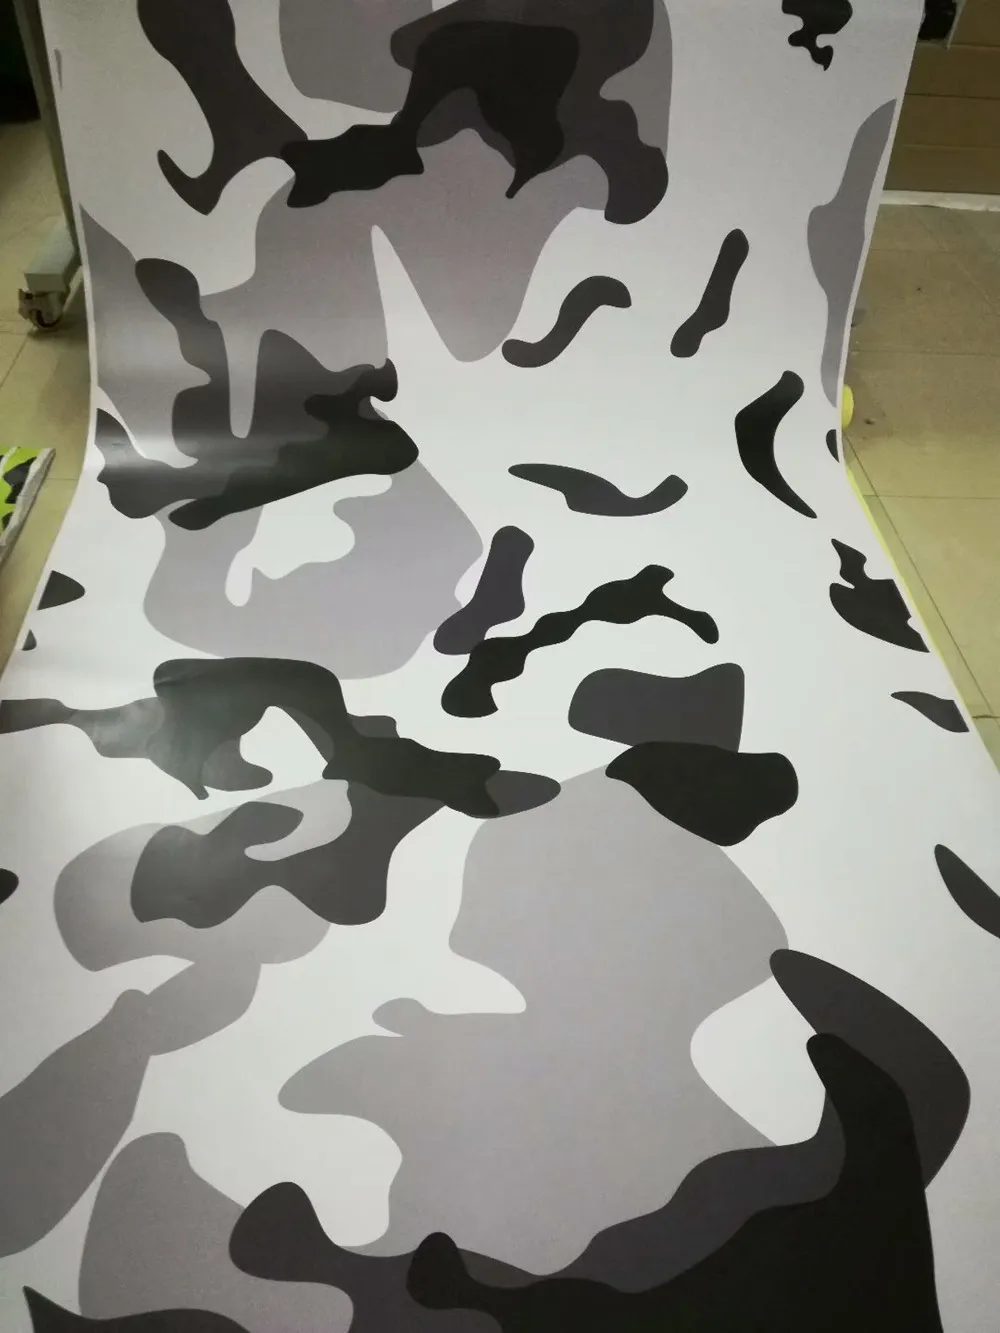 Camo VINYL Wrap Full Car Wrapping Foil Carbon Sticker In Black, White, And  Grey With Air 1.52 X 30m Roll Size From Bestcarwrap, $130.14